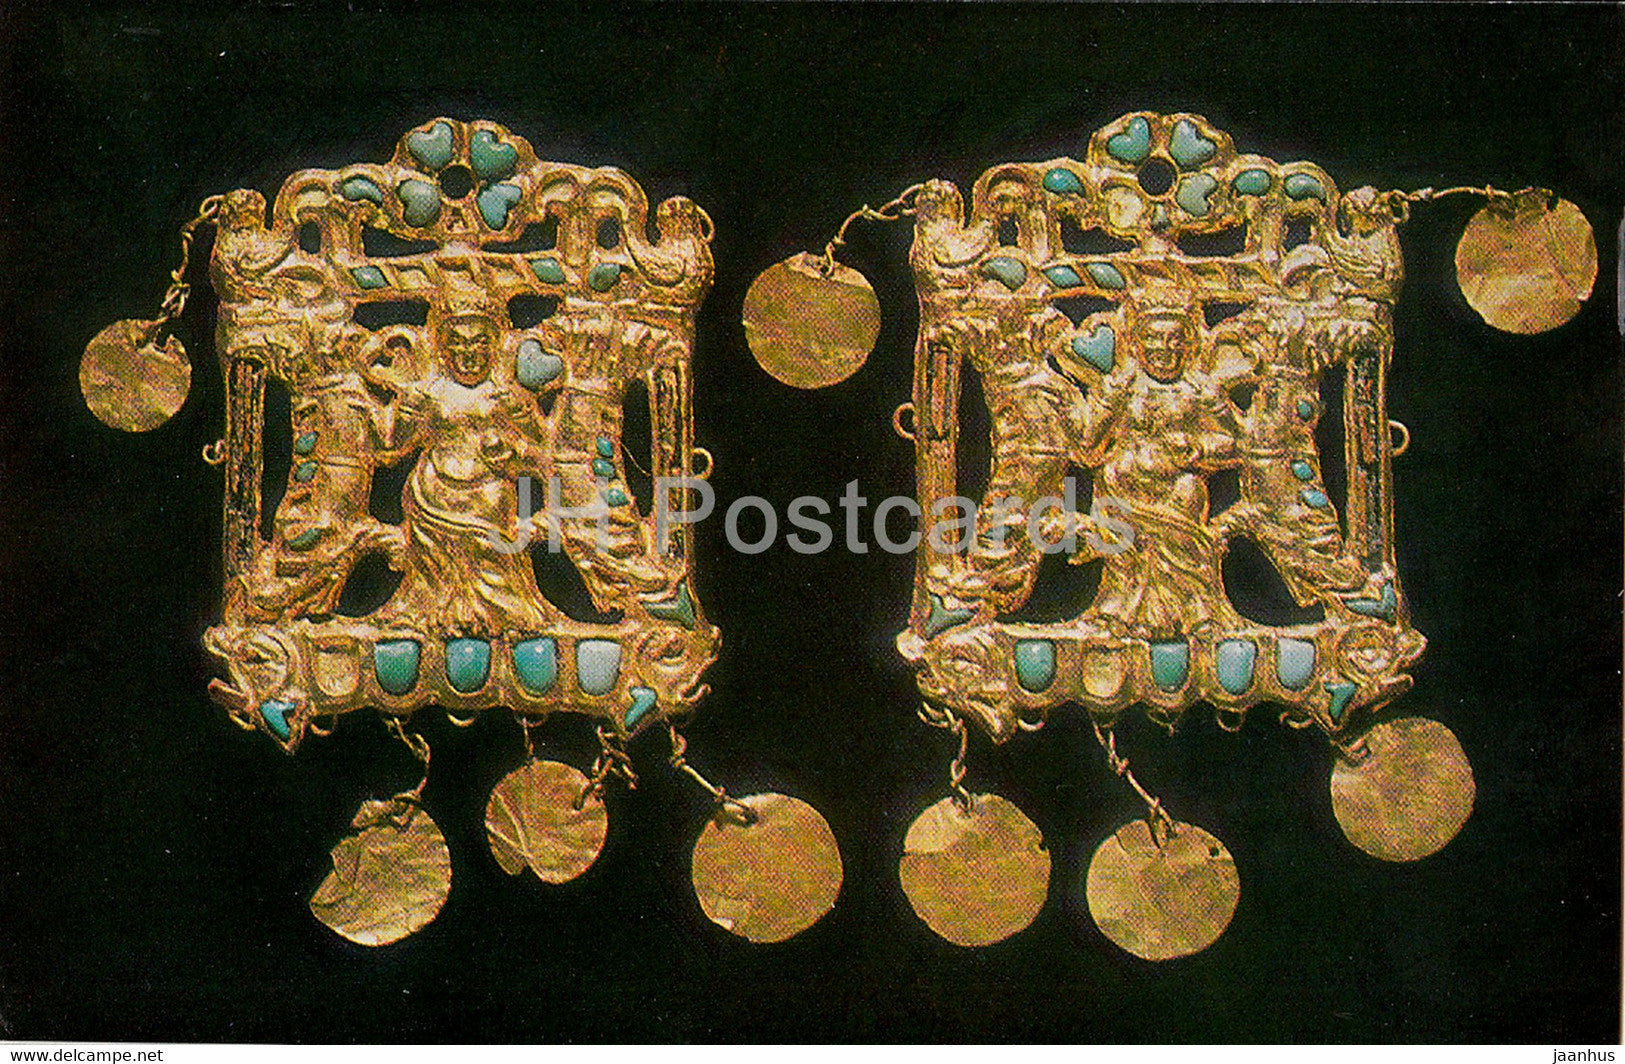 Pendants with a Goddess - National Museum of Afghanistan - archaeology - Bactrian Gold - 1984 - USSR Russia - used - JH Postcards